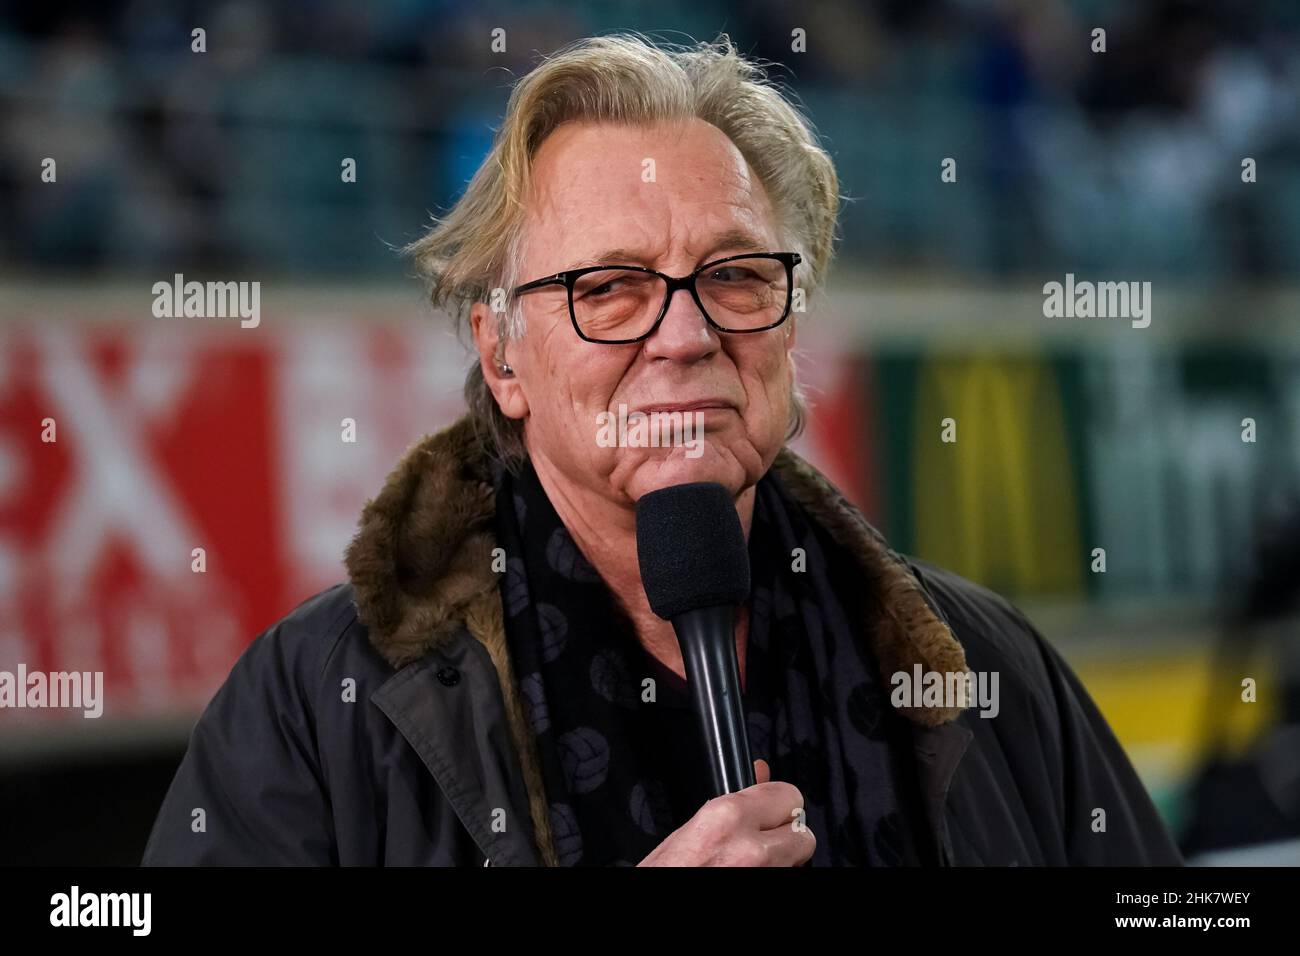 GENT, BELGIUM - FEBRUARY 2: Jan Mulder during the Croky Cup Semi Final 1st Leg match between KAA Gent and Club Brugge at the Ghelamco Arena on February 2, 2022 in Gent, Belgium (Photo by Jeroen Meuwsen/Orange Pictures) Stock Photo